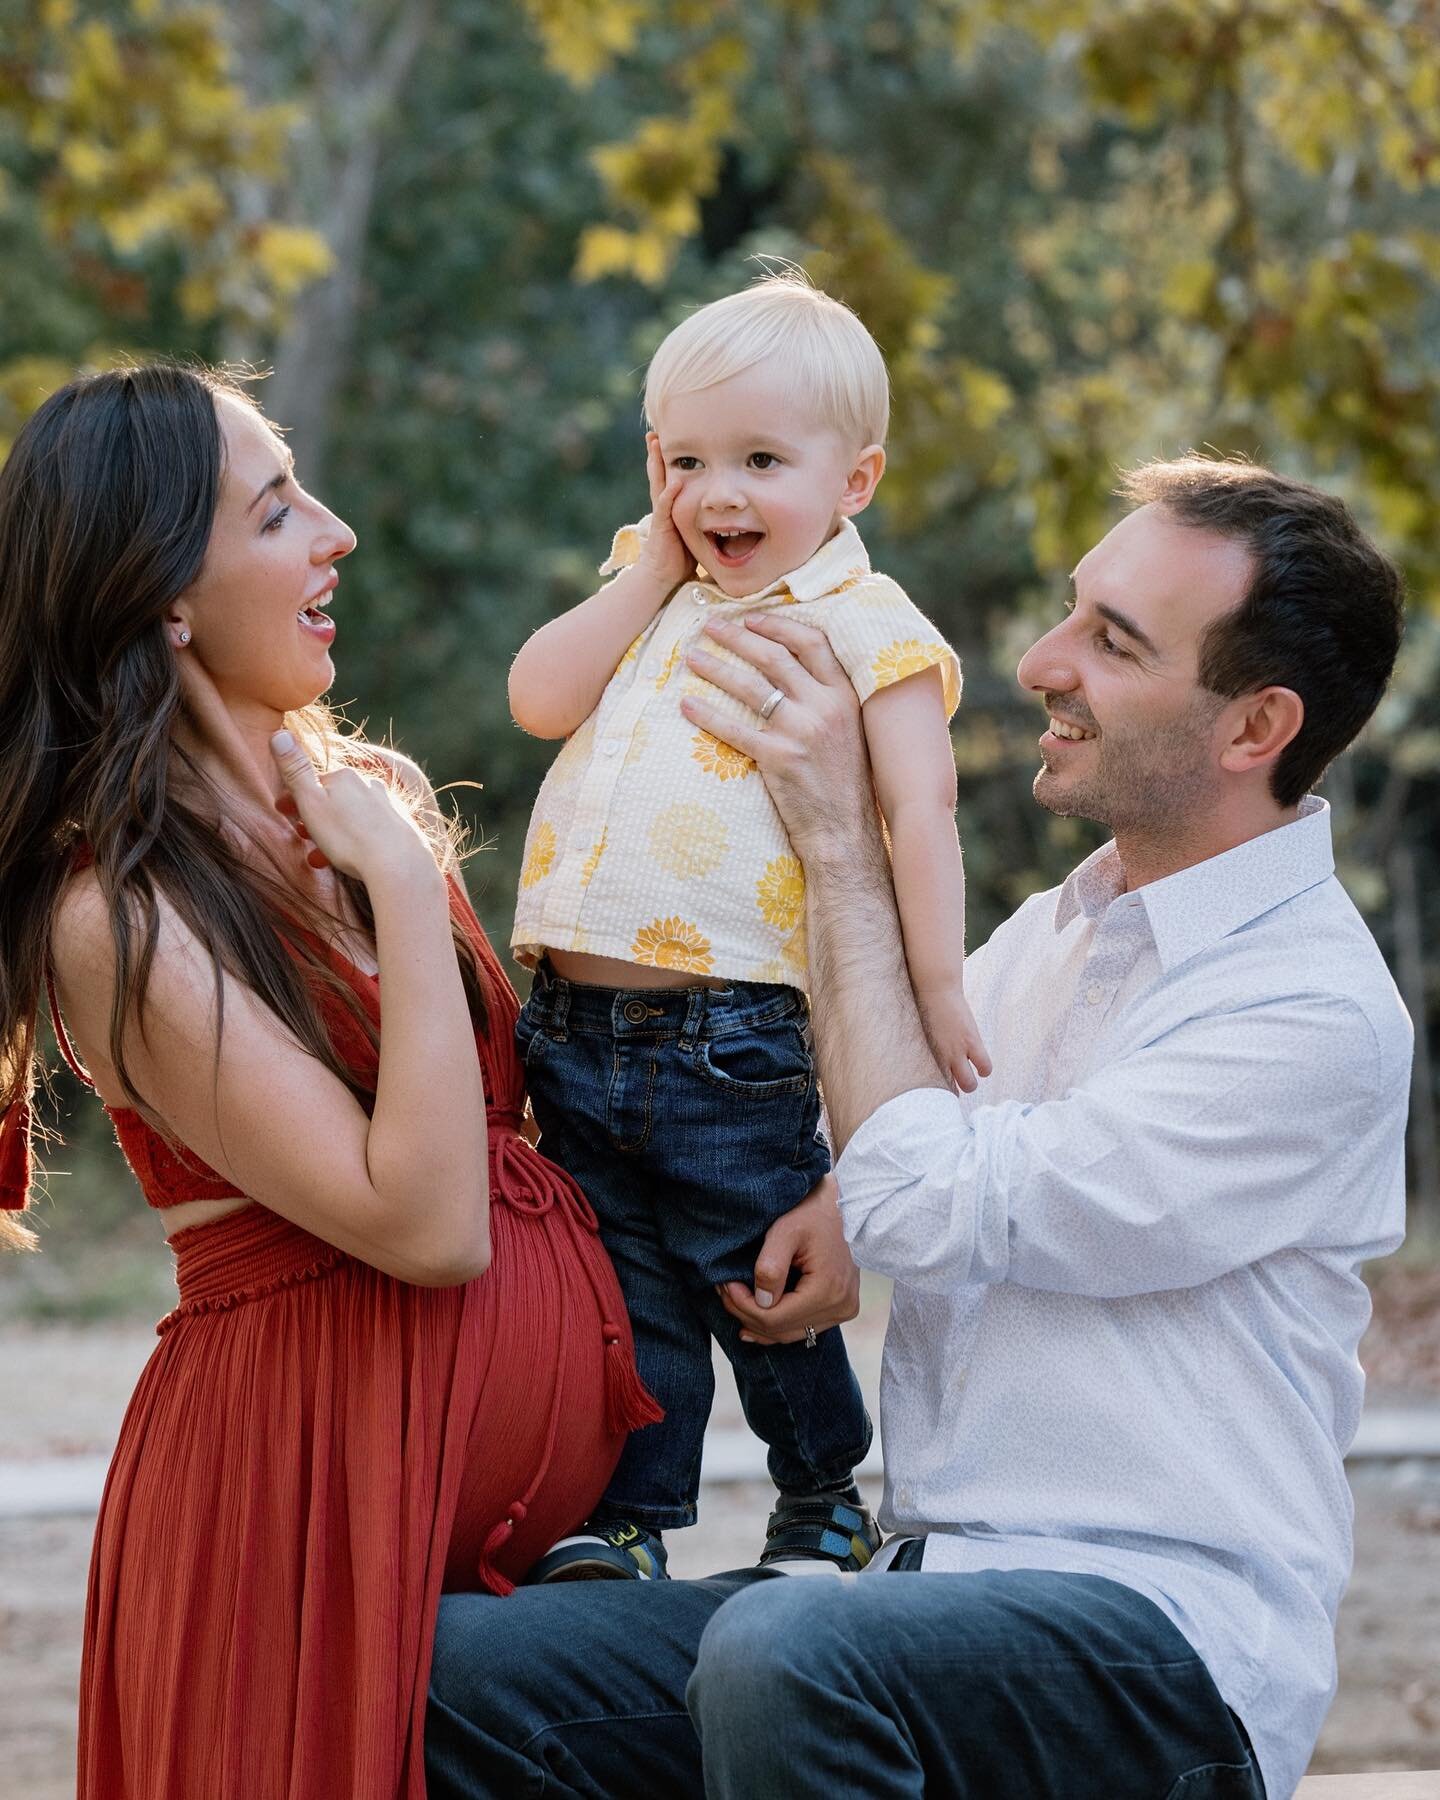 Is it that time of year again?? Fall portrait dates are a comin&rsquo;&hellip;.
#sacramentofamilyphotographer #fallfamilyphotos